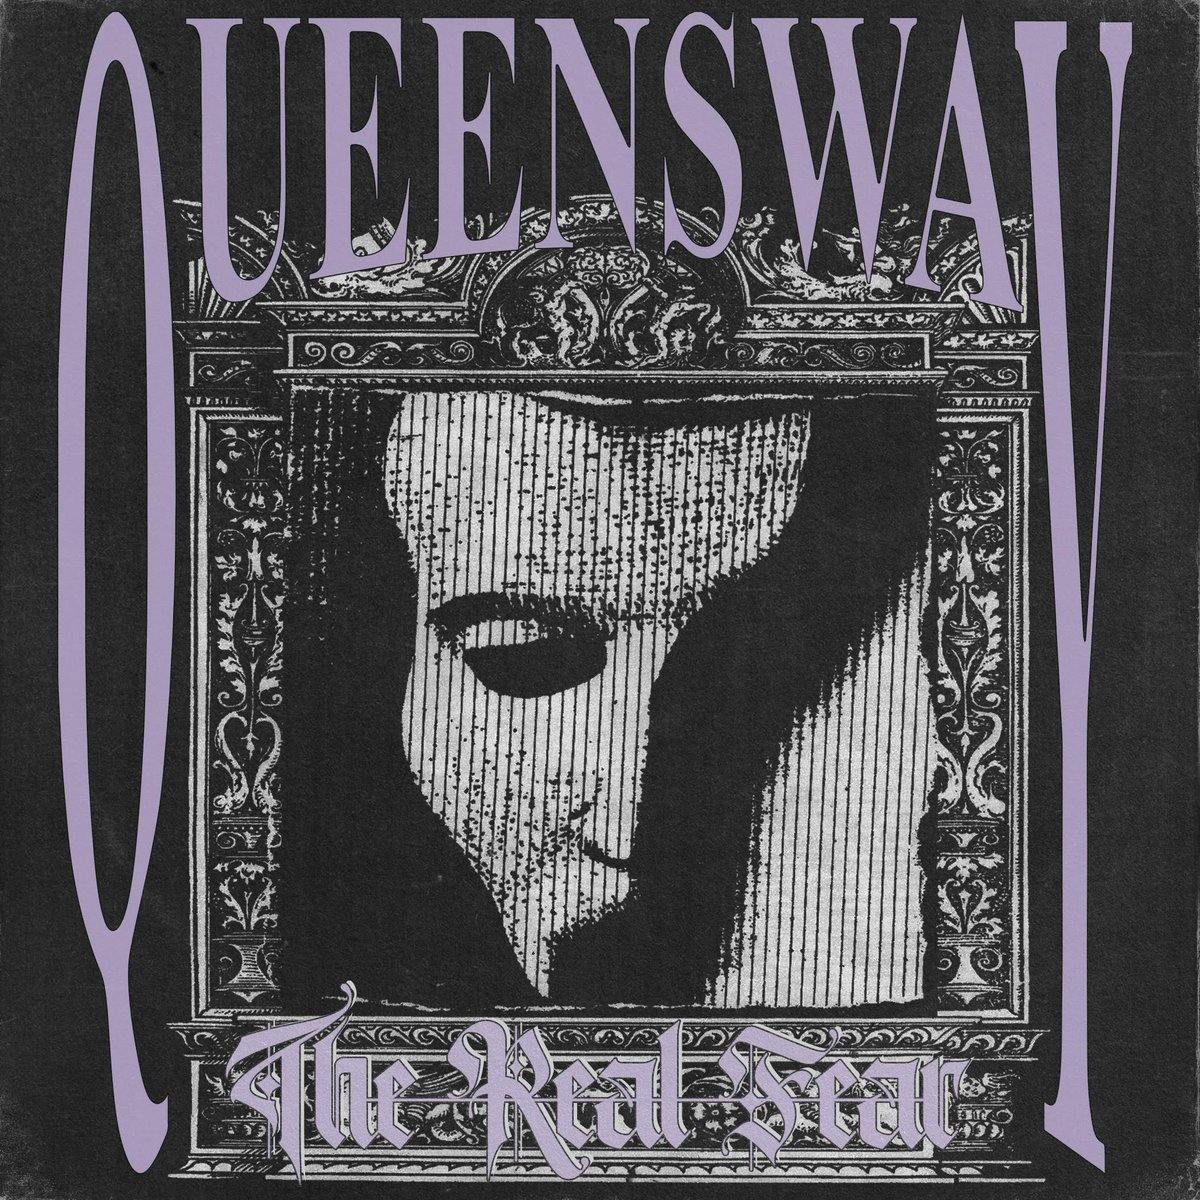 Buy – Queensway "The Real Fear" CD – Band & Music Merch – Cold Cuts Merch